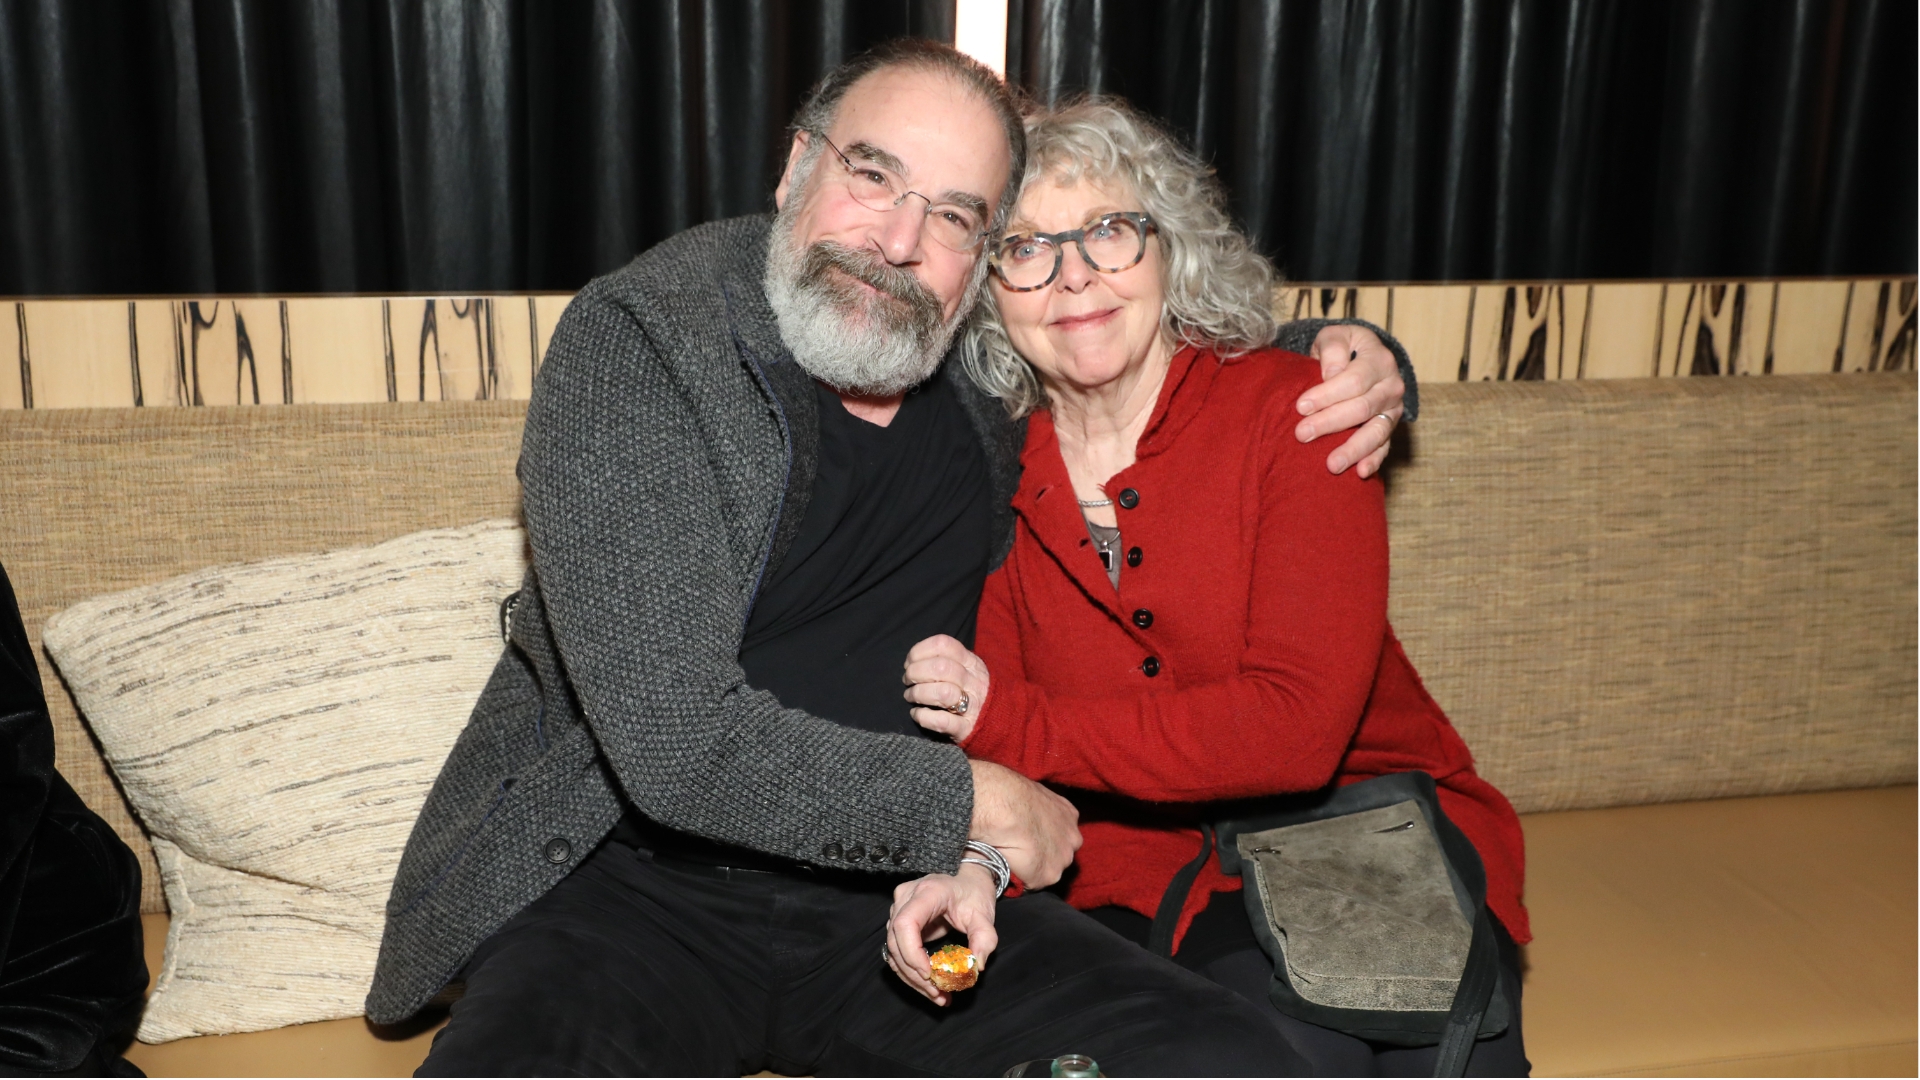 Mandy Patinkin and Kathryn Grody are getting a series based on their “delightfully tumultuous” marriage